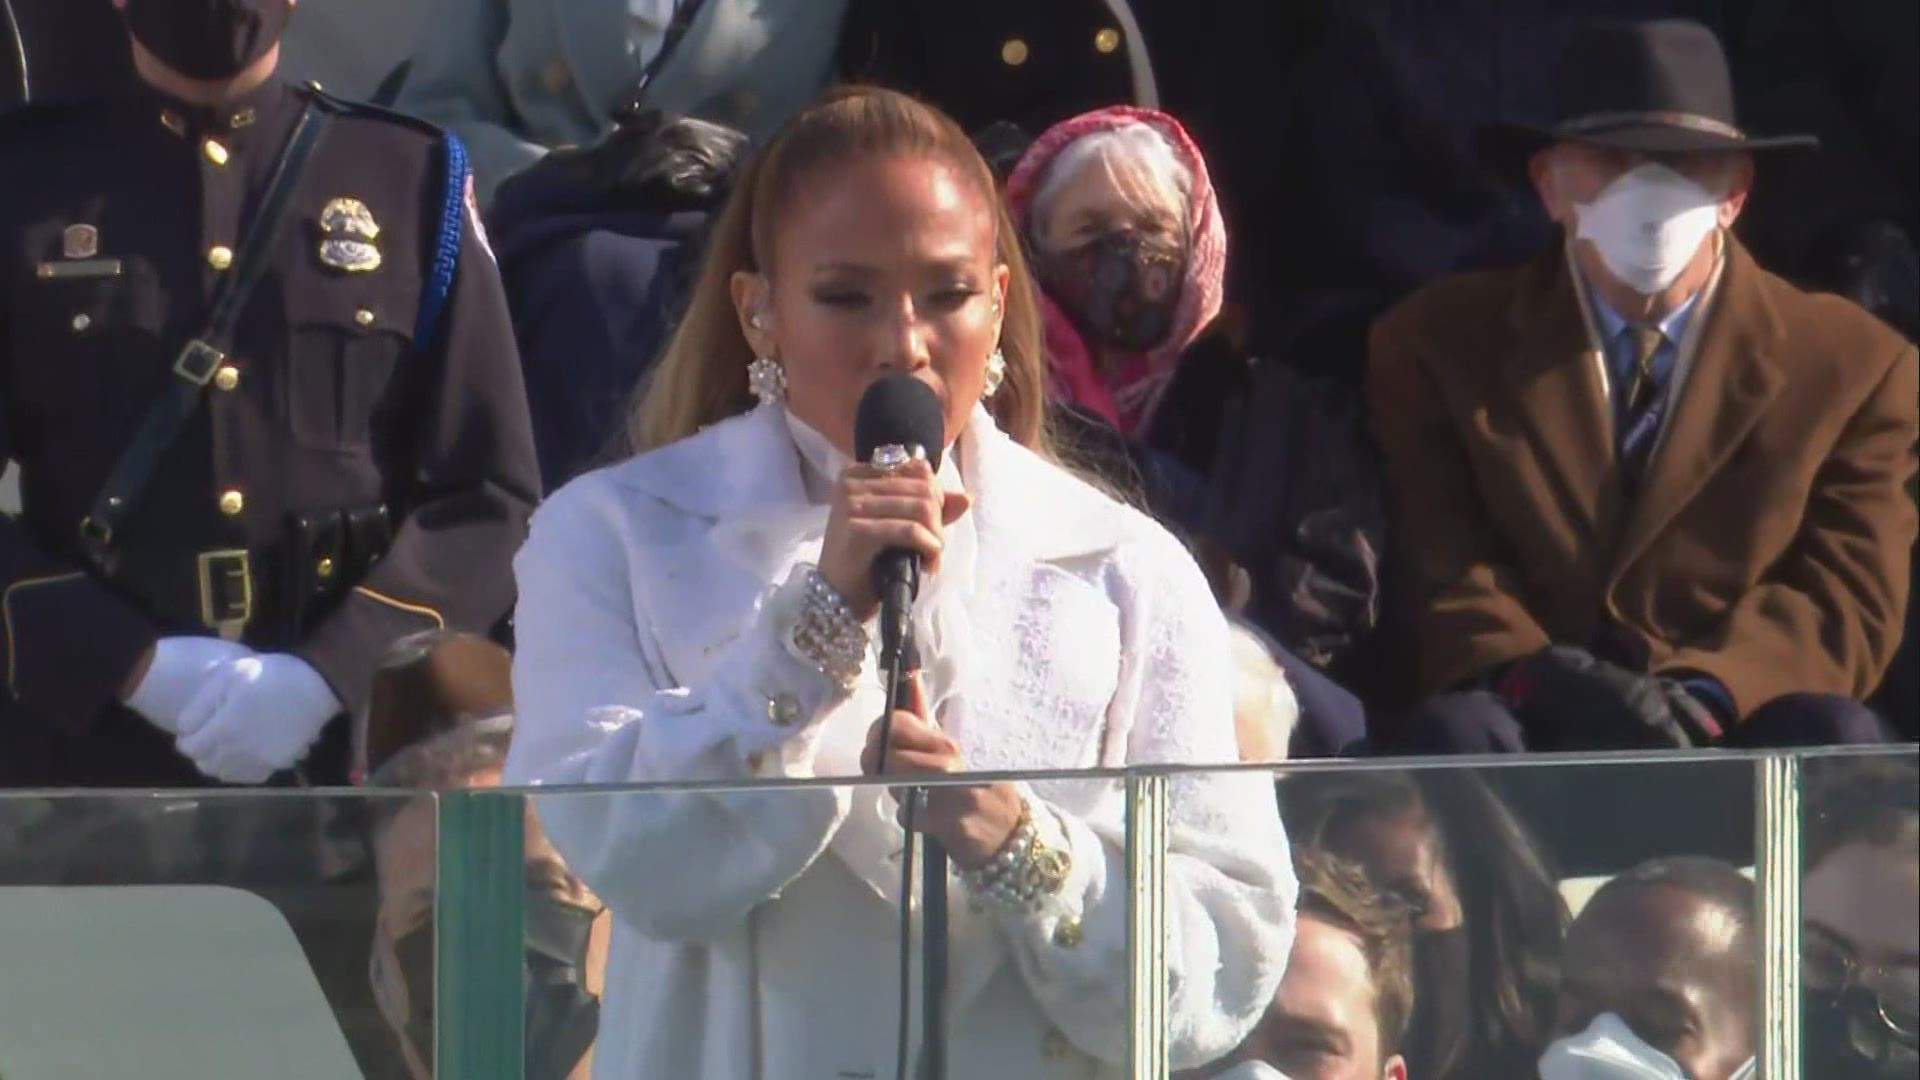 Jennifer Lopez sings a mashup of 'This Land is Your Land' and 'America the Beautiful' at inauguration.